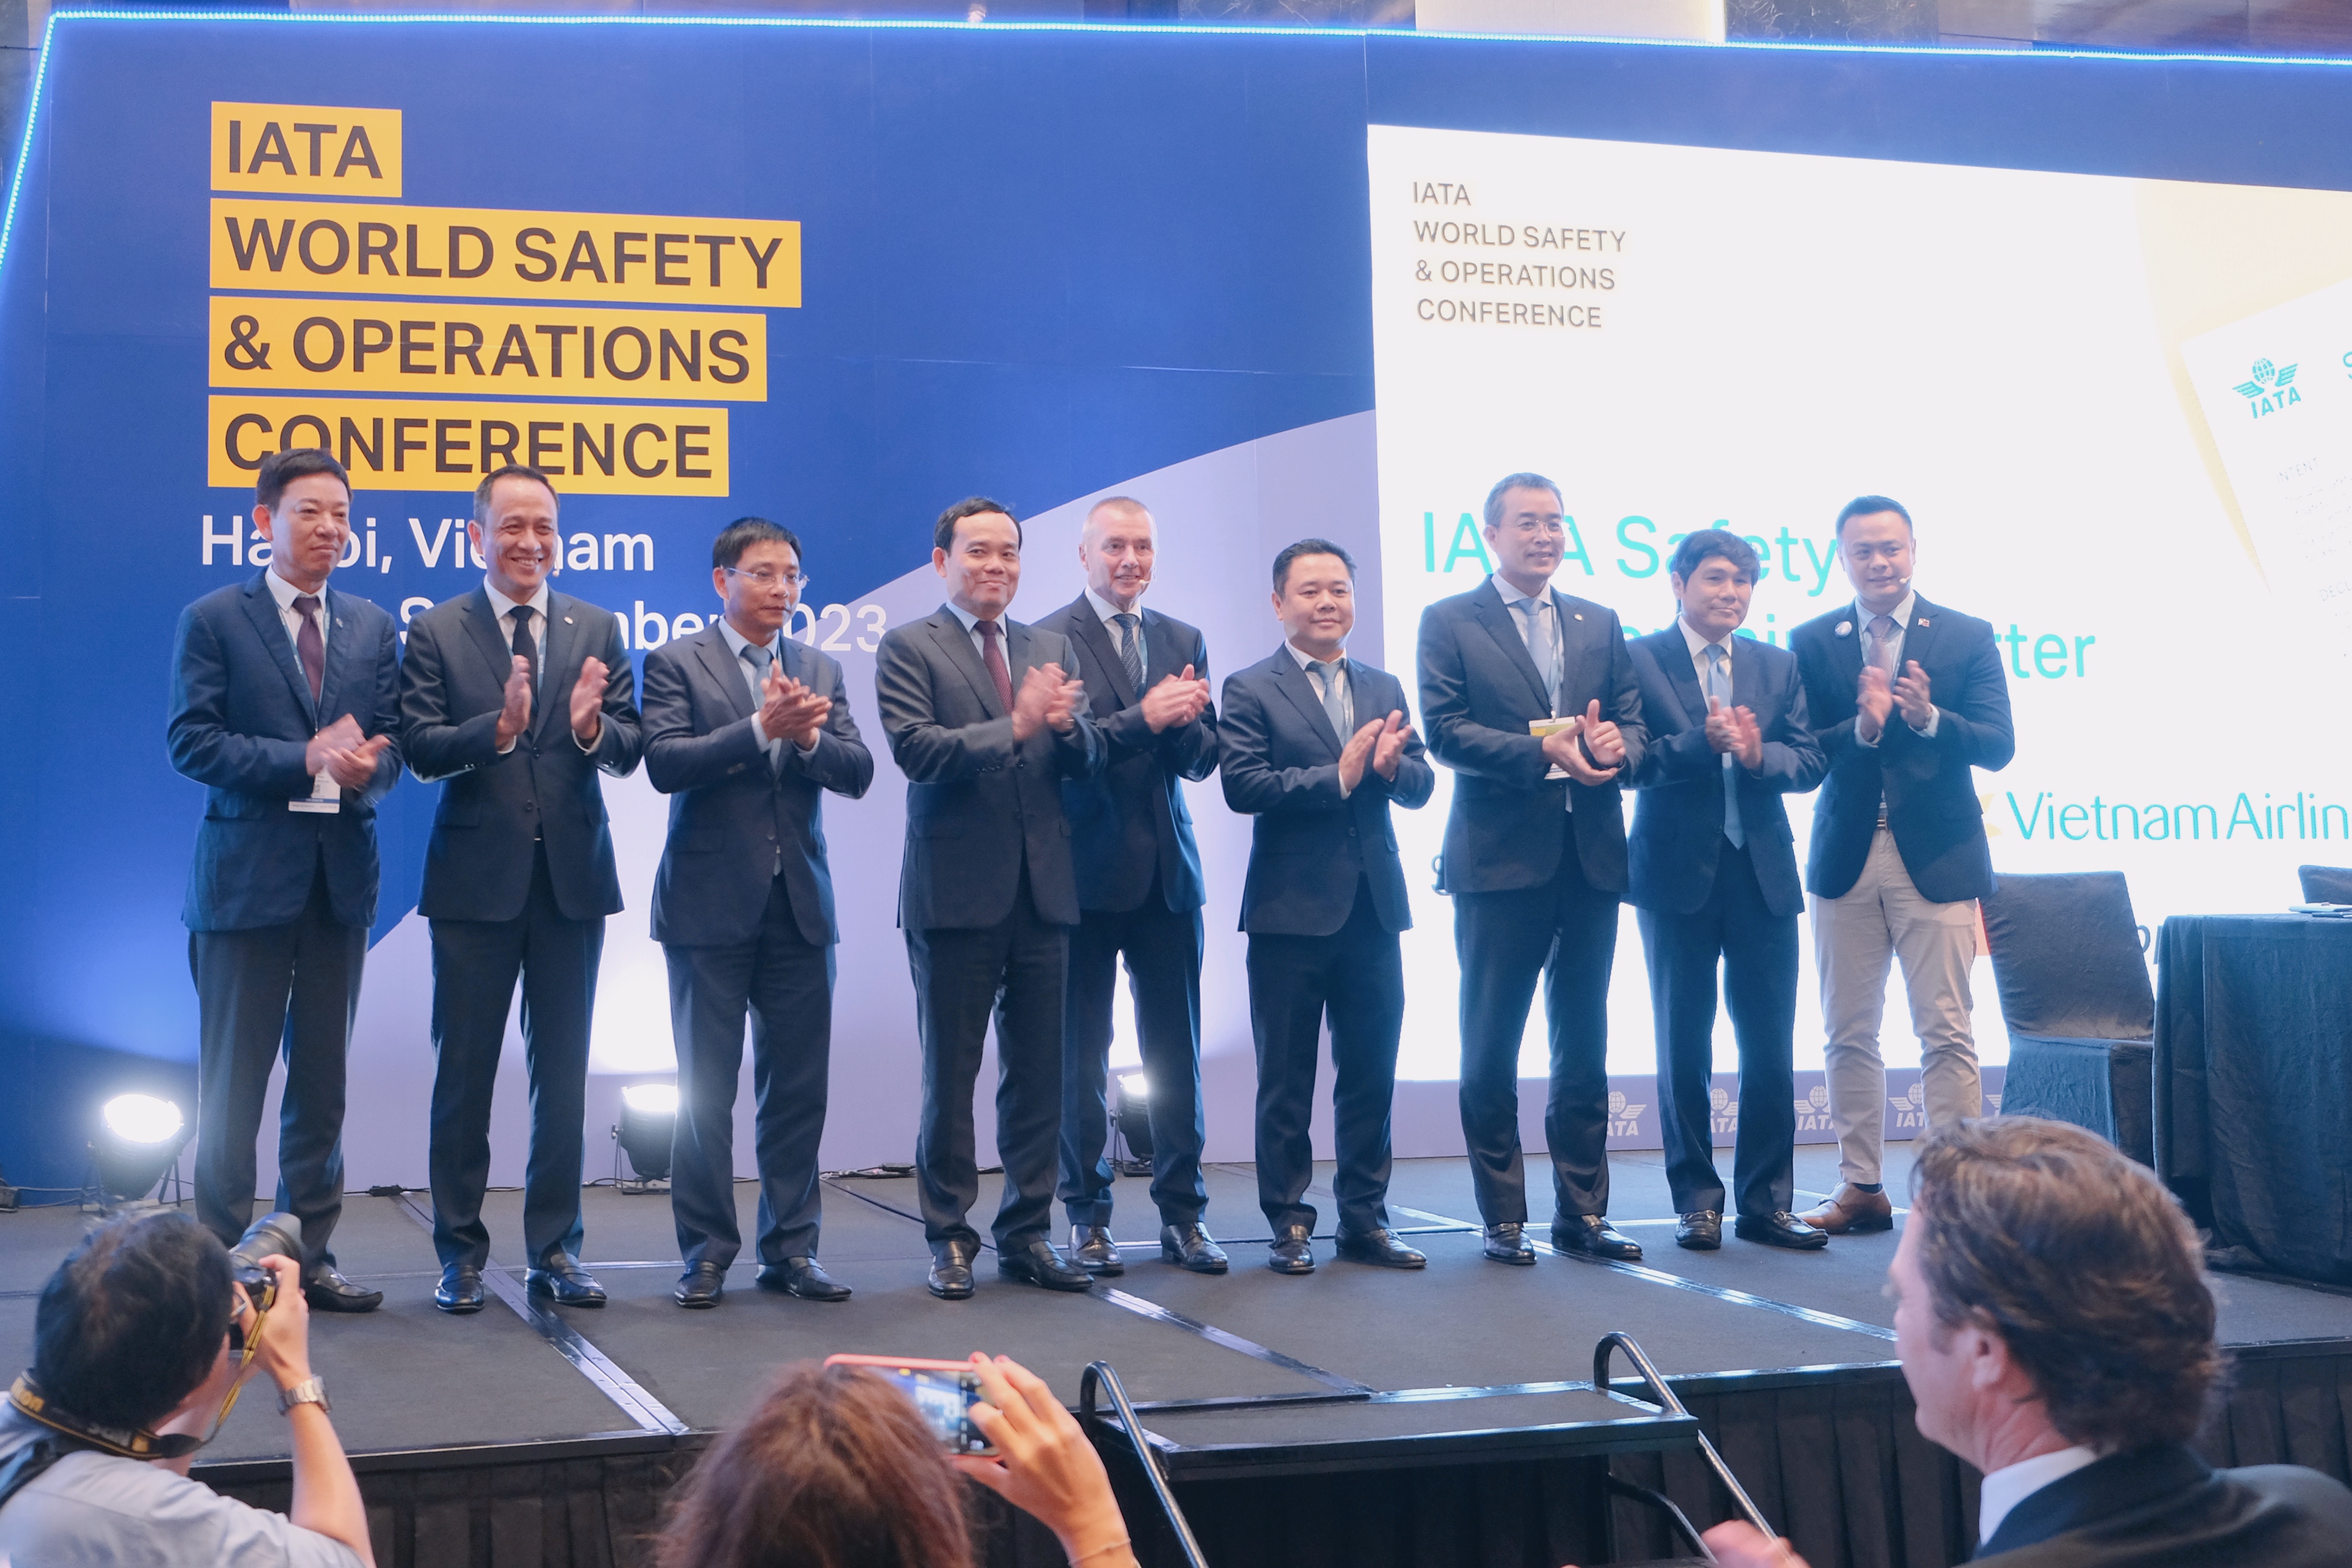 Vietnam Airlines and IATA signed a Charter on Safety Culture at the Conference. Source: Vietnam Airlines